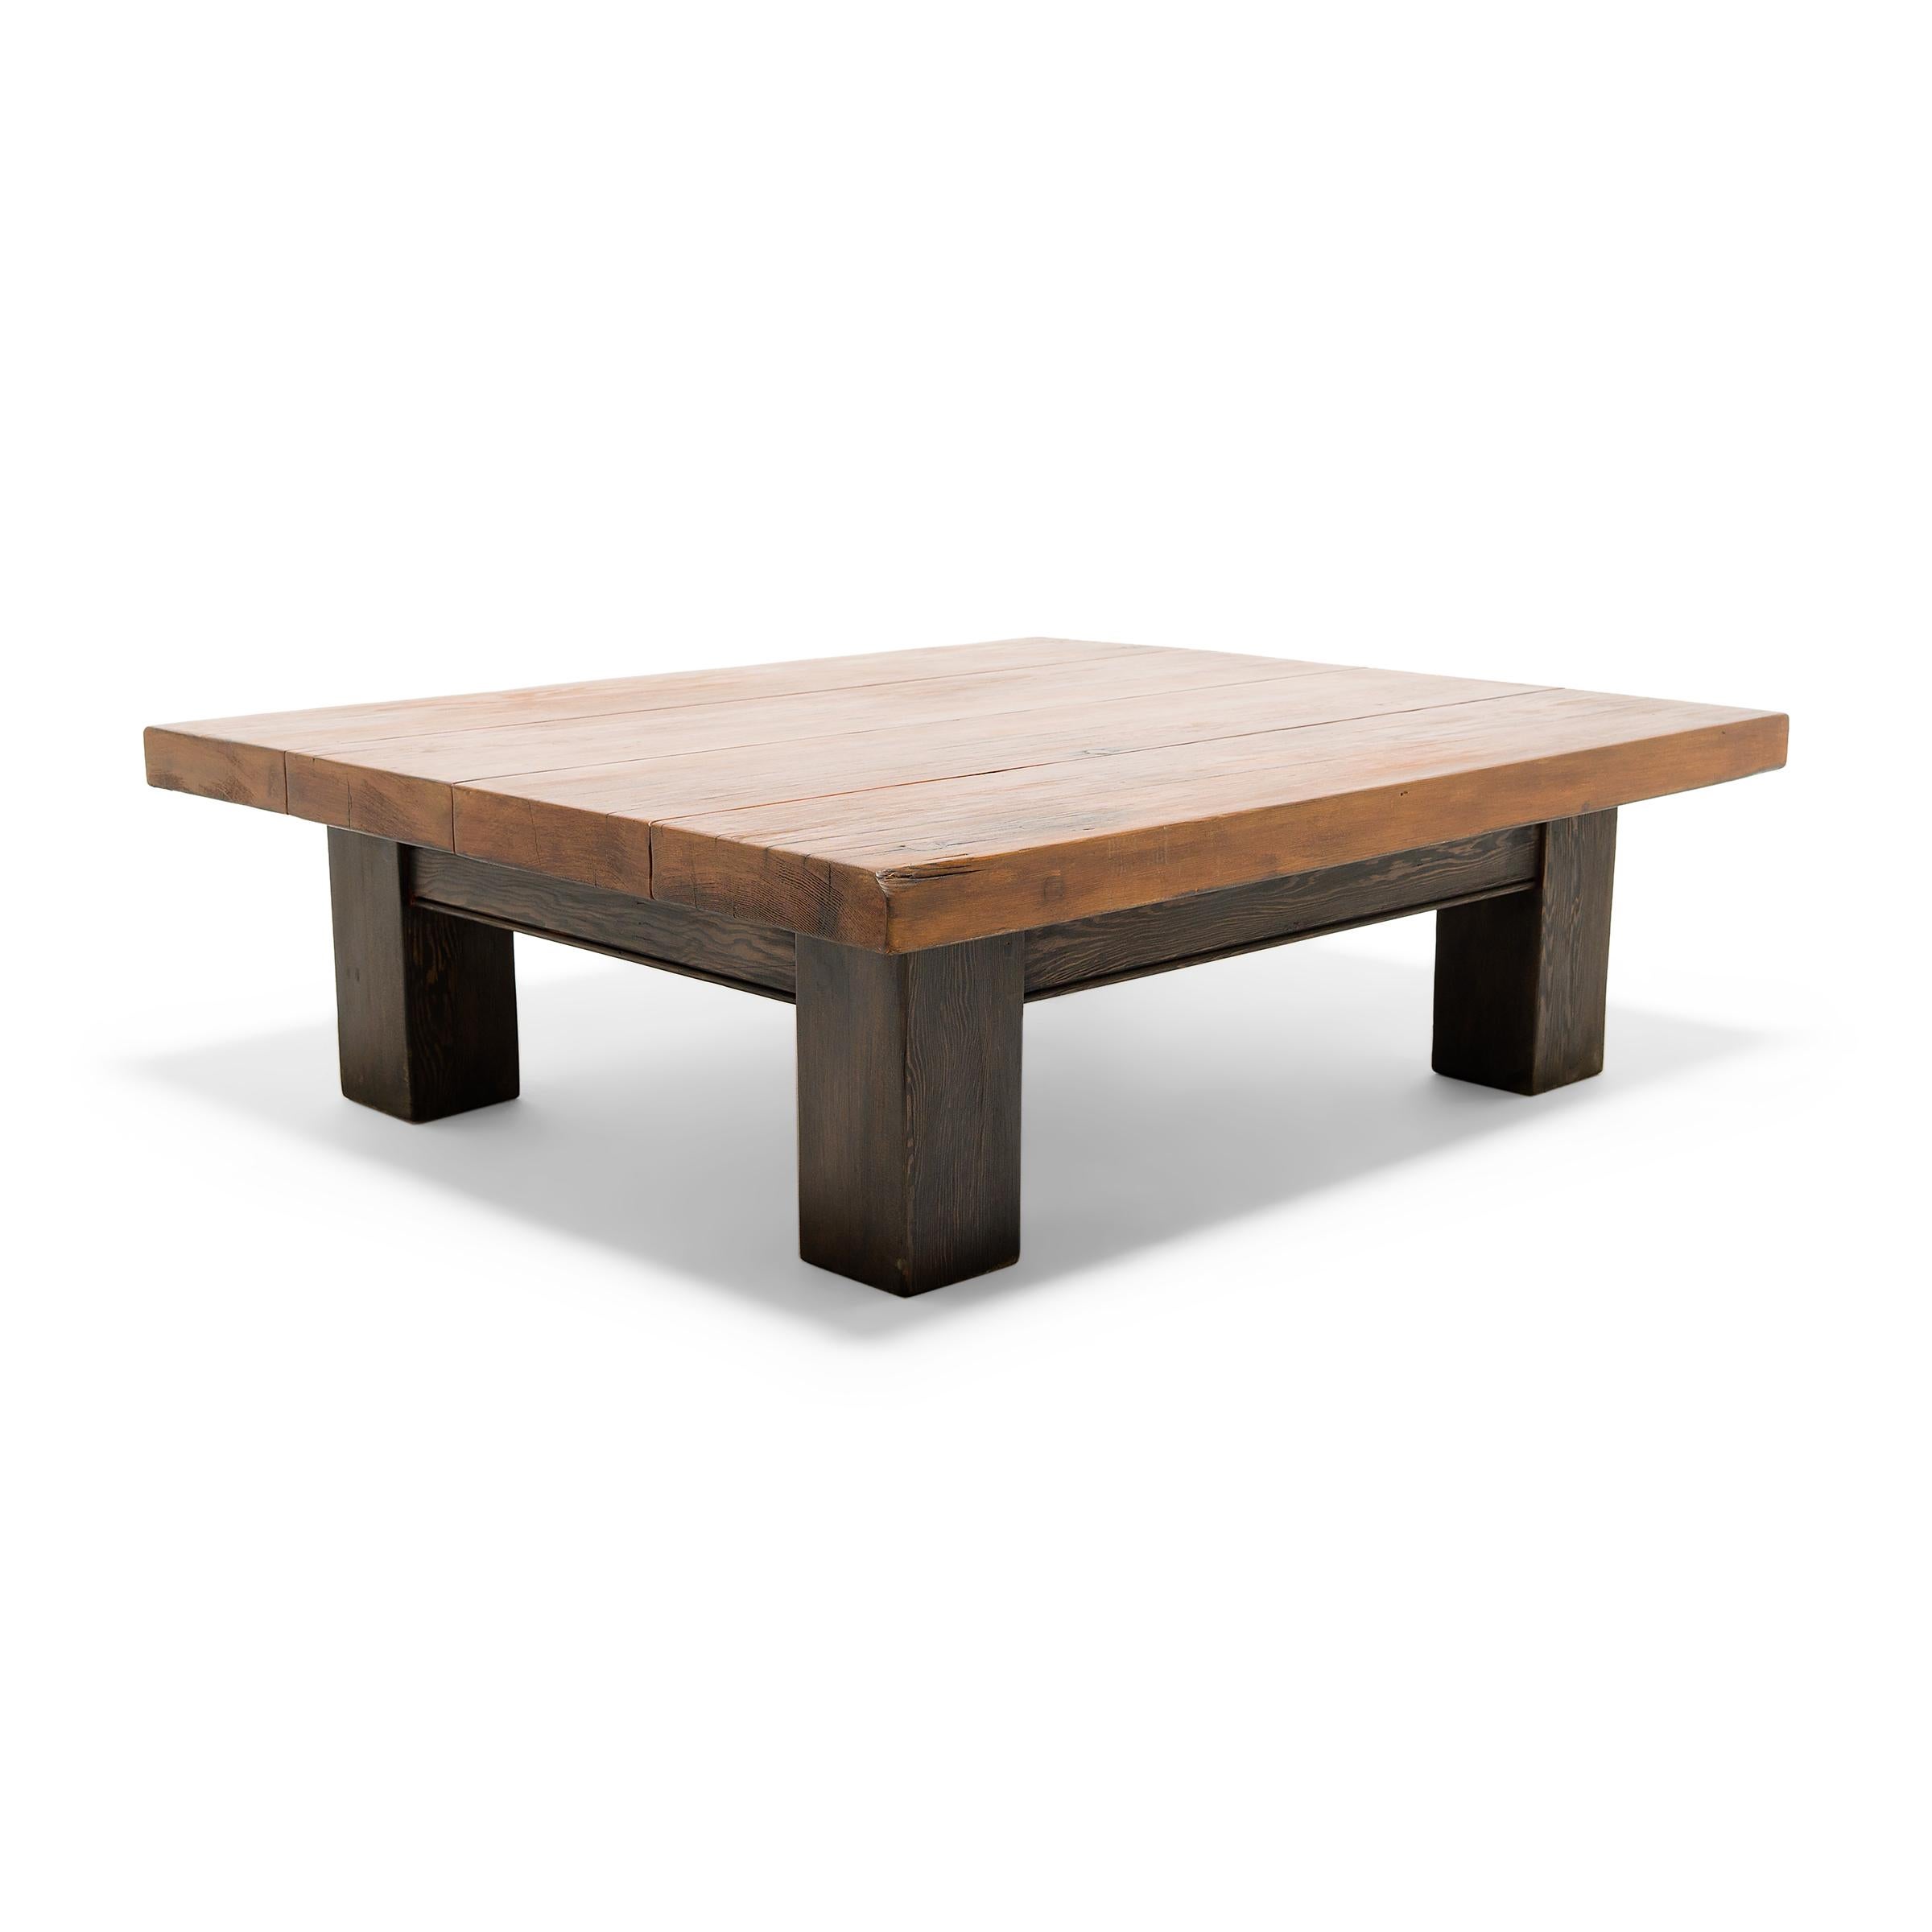 American Low Plank Top Table